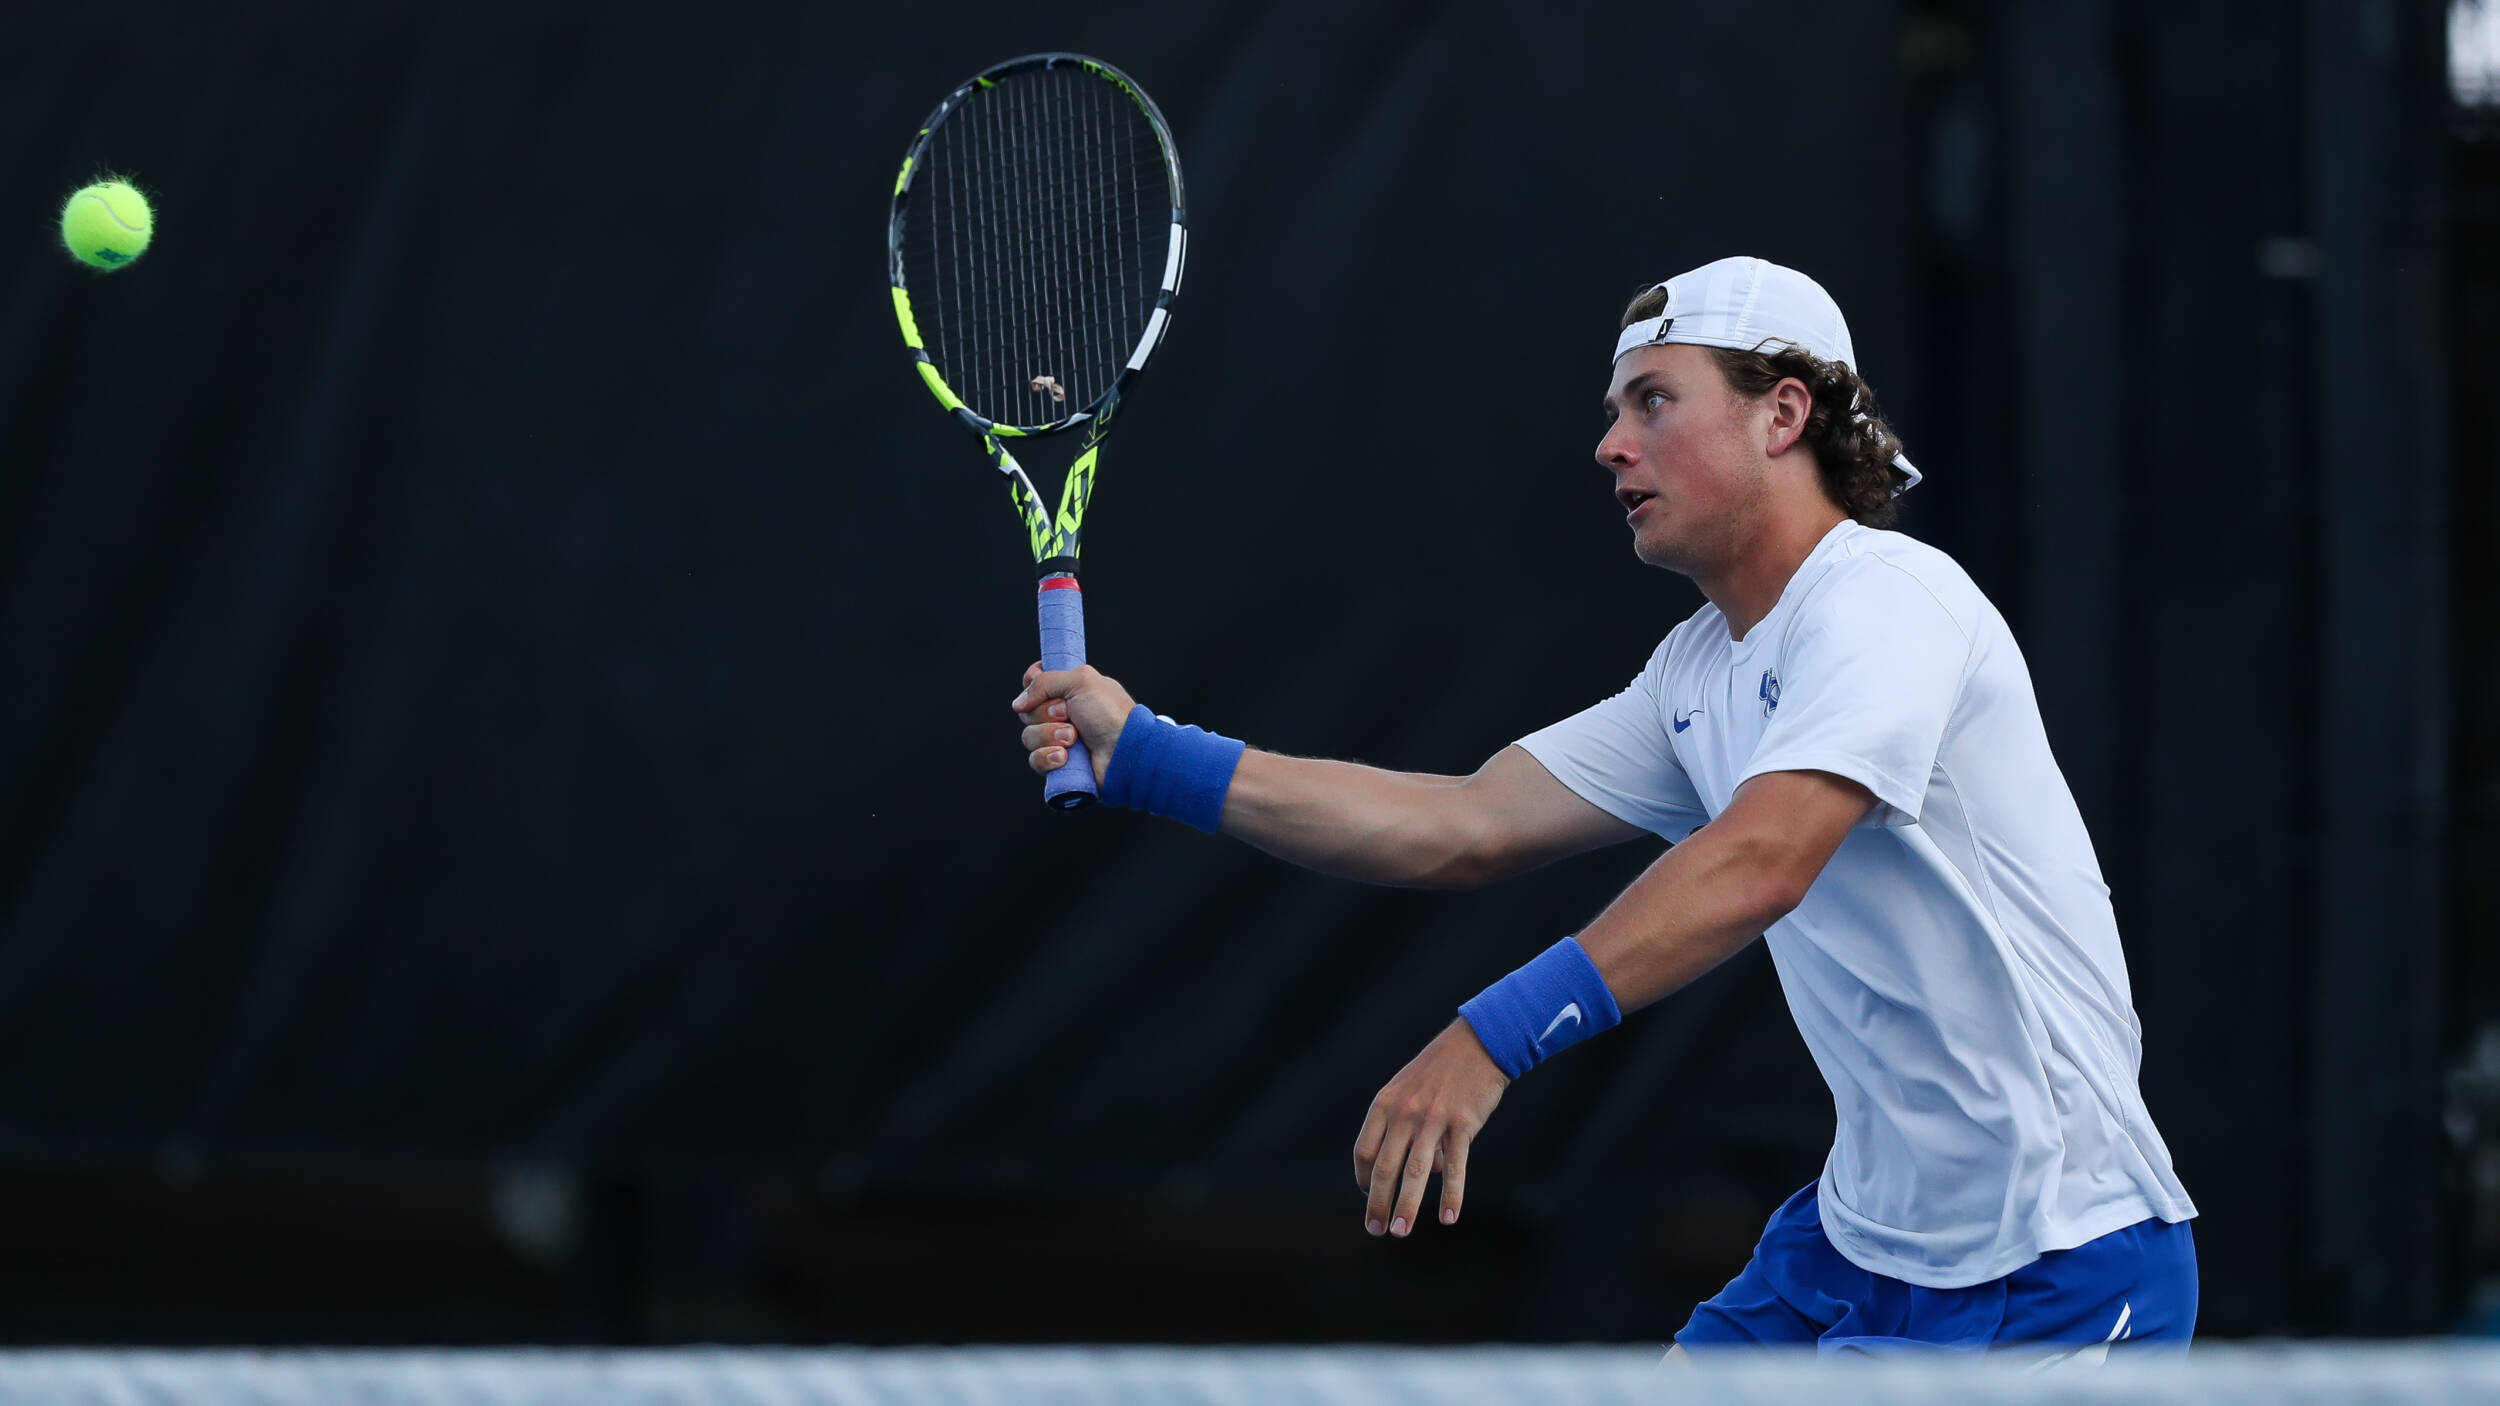 Draxl Falls in Round of 16, Kentucky Wraps Up NCAA Singles Play